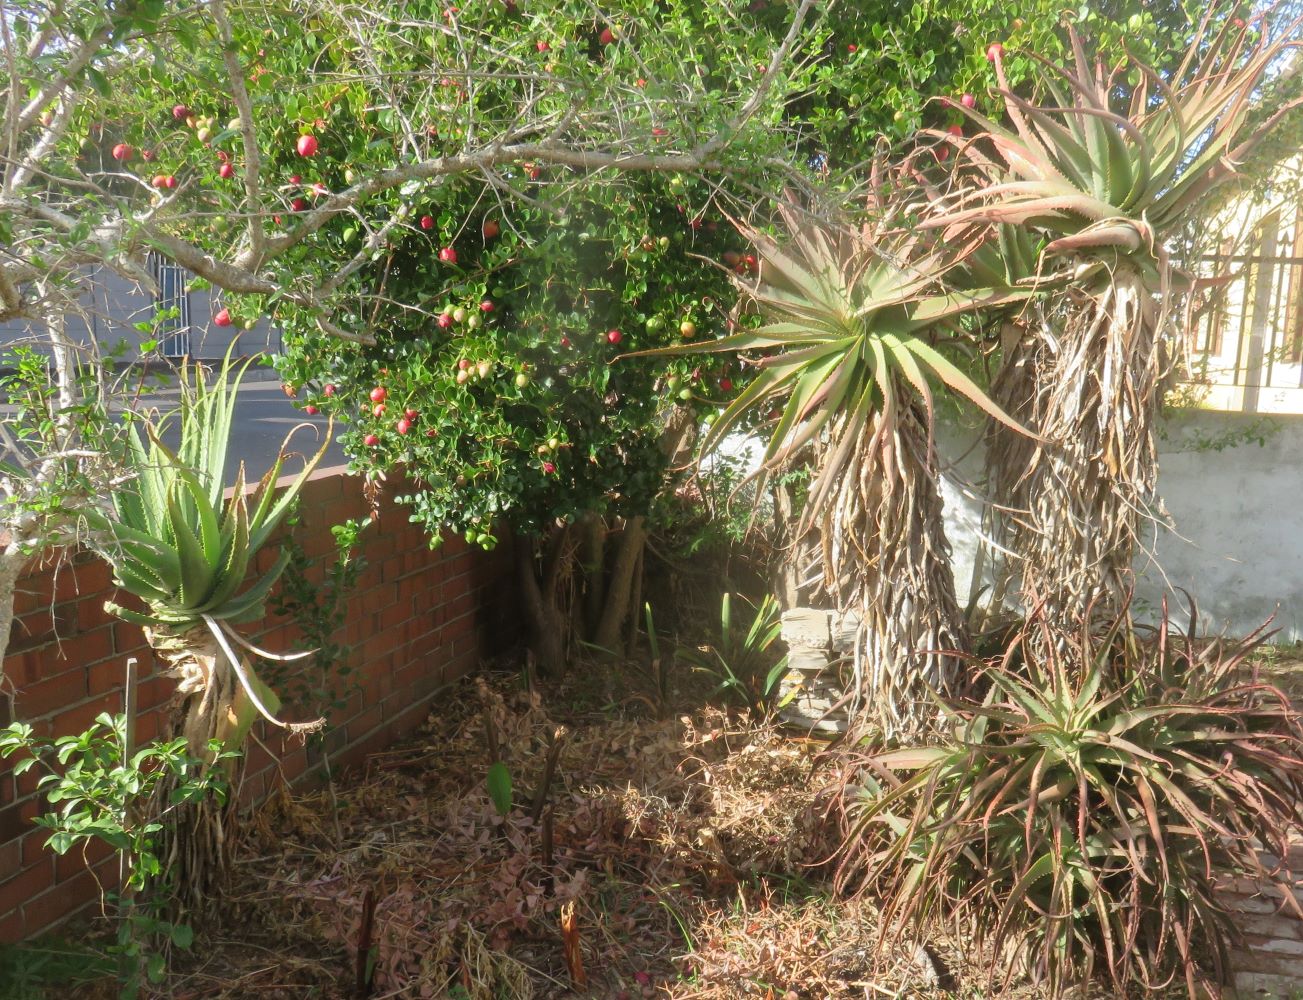 The single head and  height of Aloe arborescens. The one growing at the street wall has been harvested by passers by for medicinal and cosmetic use.